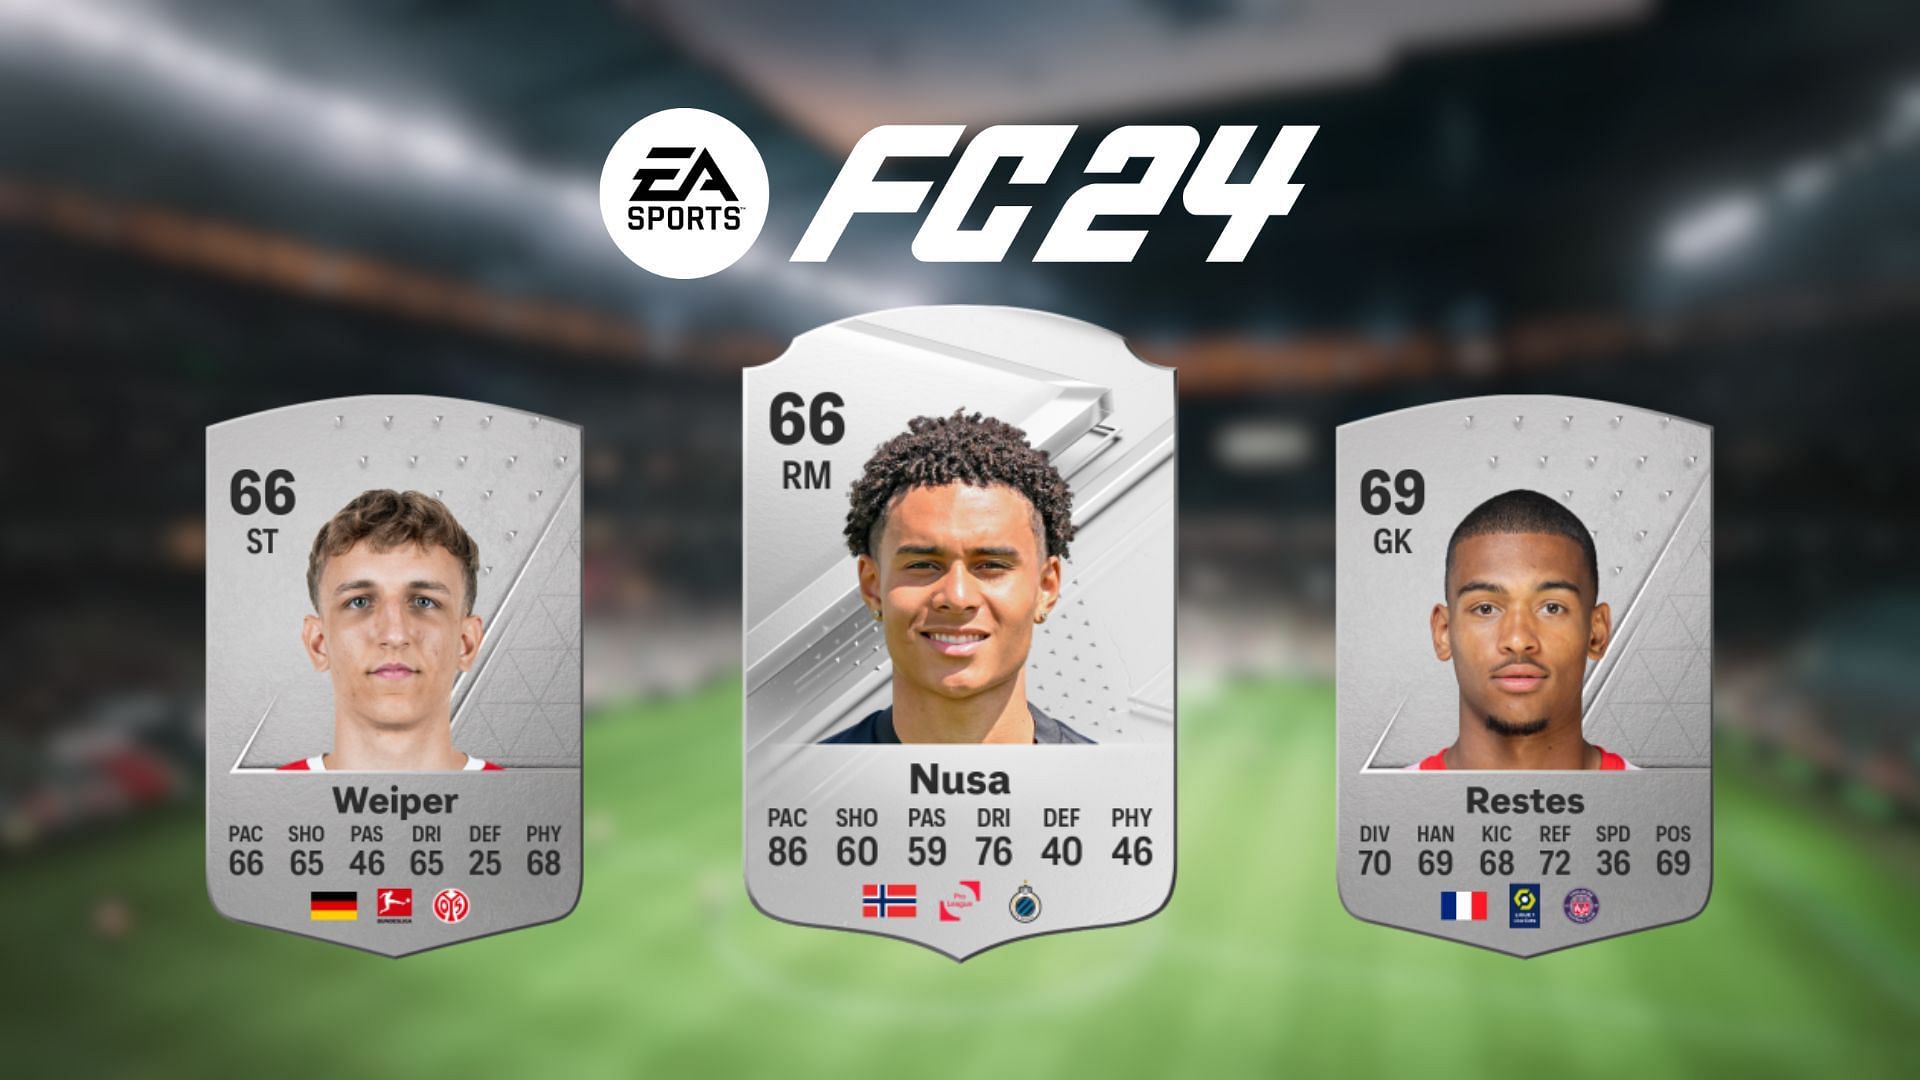 Top 5 EA FC 24 players with the highest potential in career mode